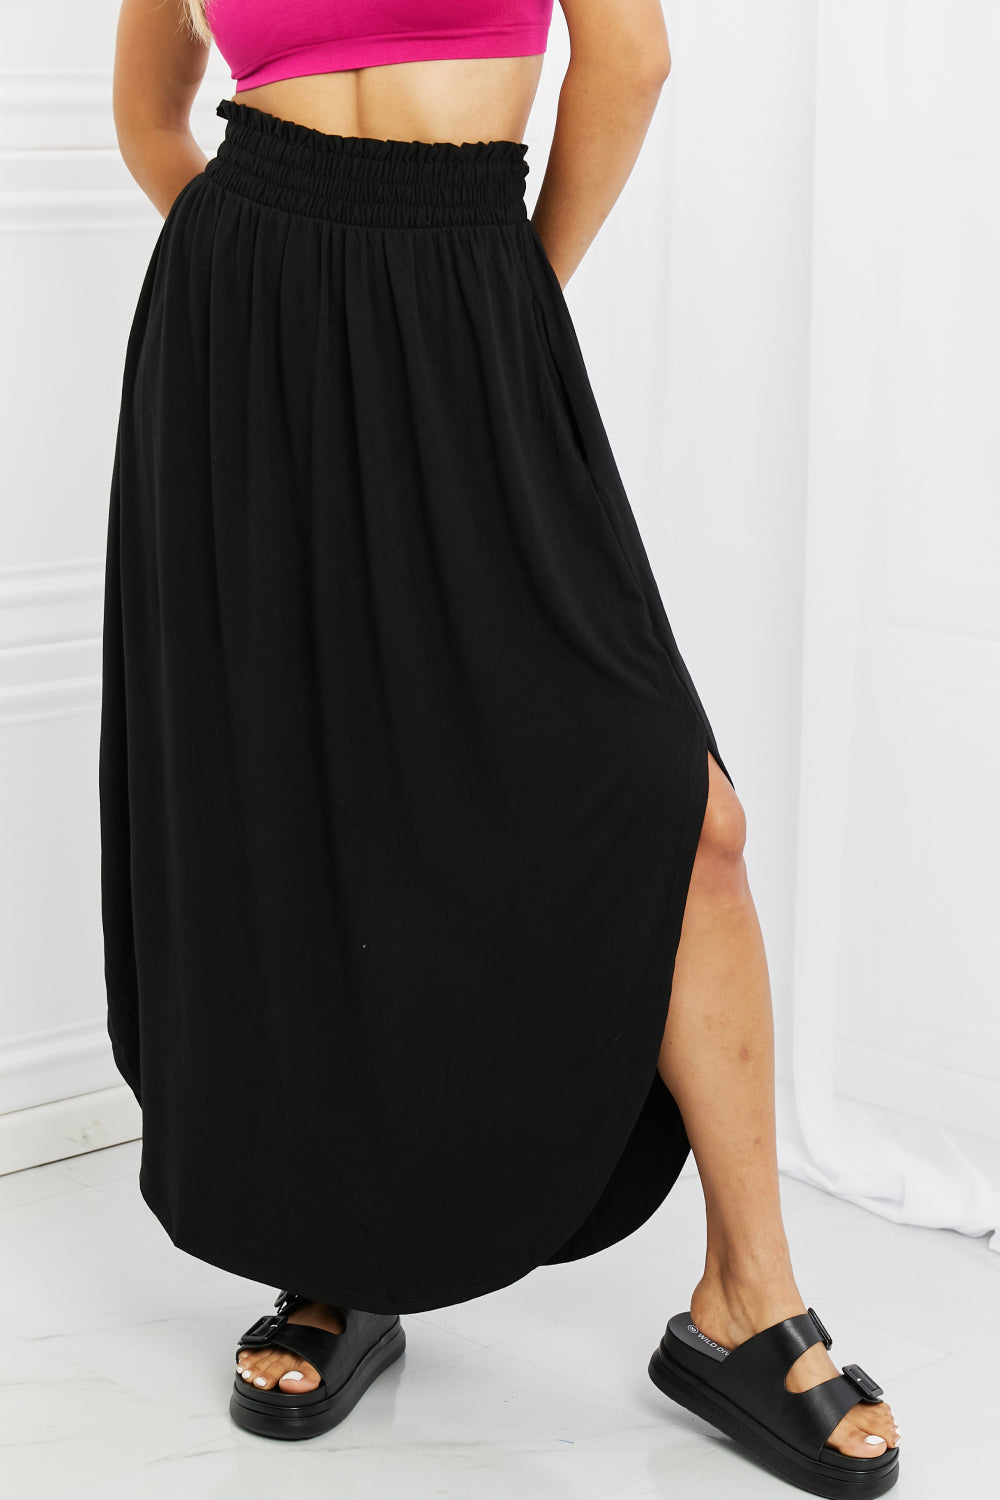 Mia Maxi Skirt with Pockets in Black